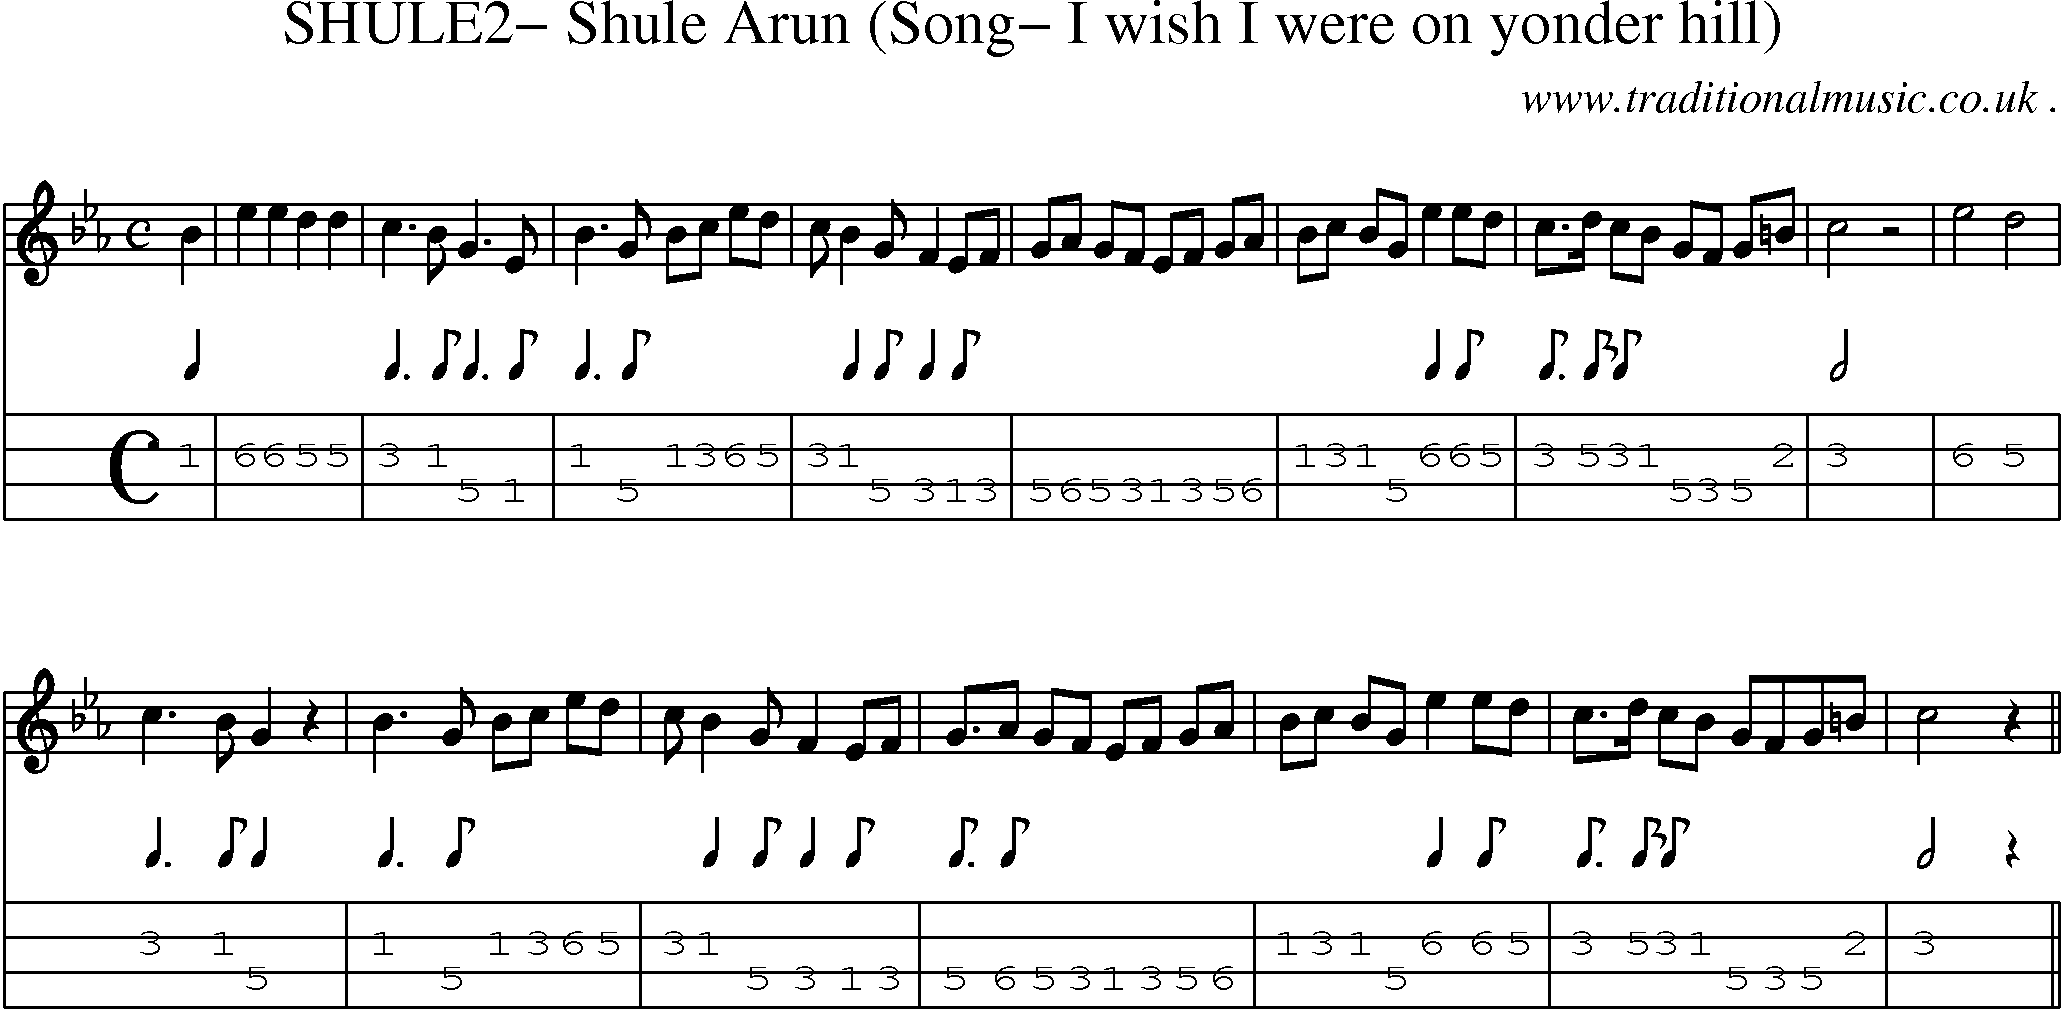 Sheet-Music and Mandolin Tabs for Shule2 Shule Arun (song I Wish I Were On Yonder Hill)